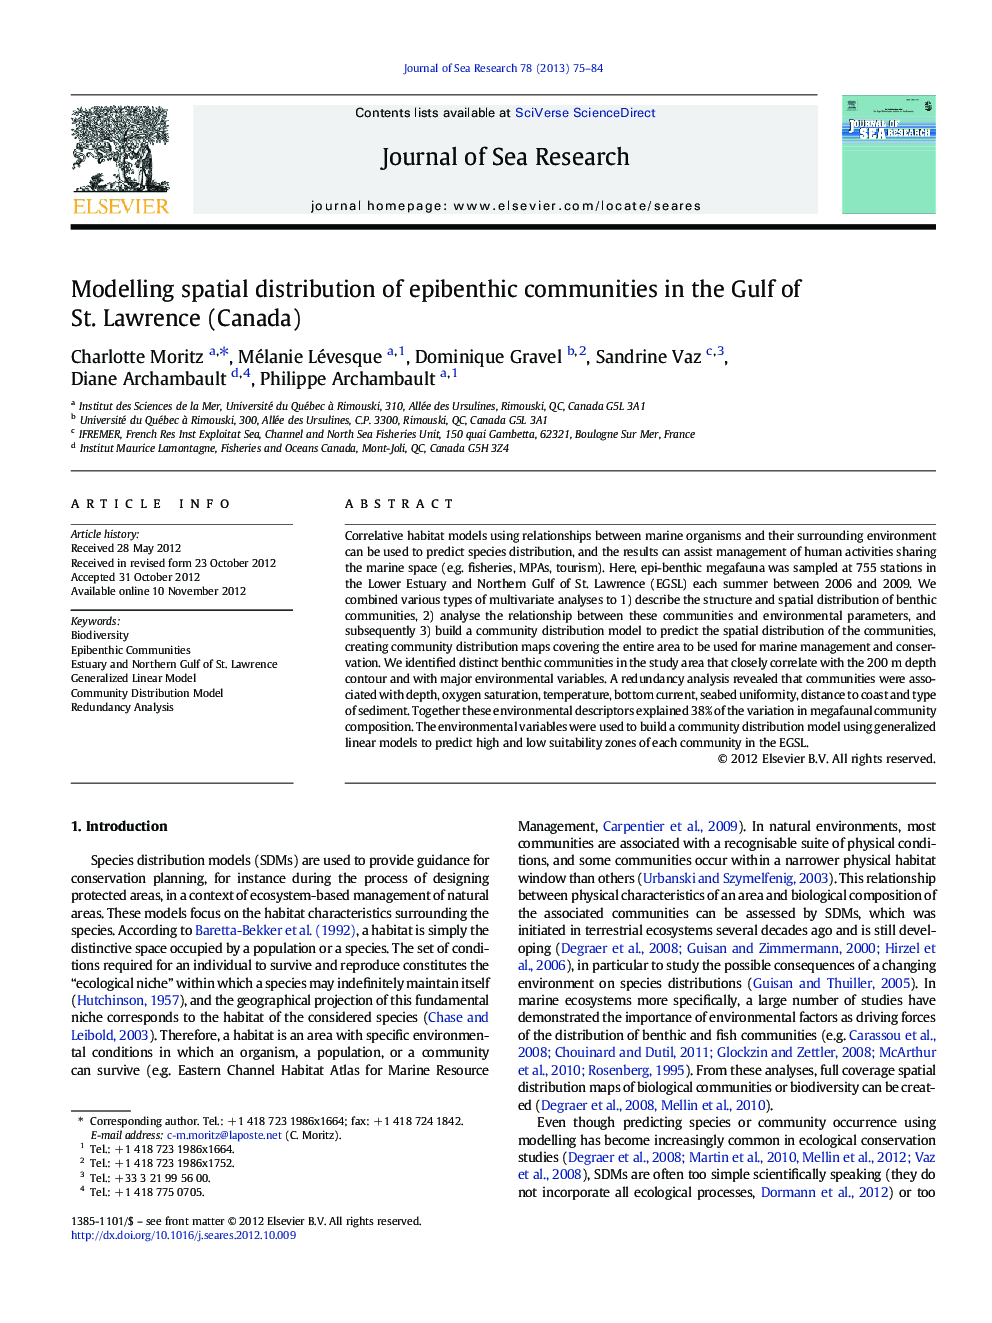 Modelling spatial distribution of epibenthic communities in the Gulf of St. Lawrence (Canada)